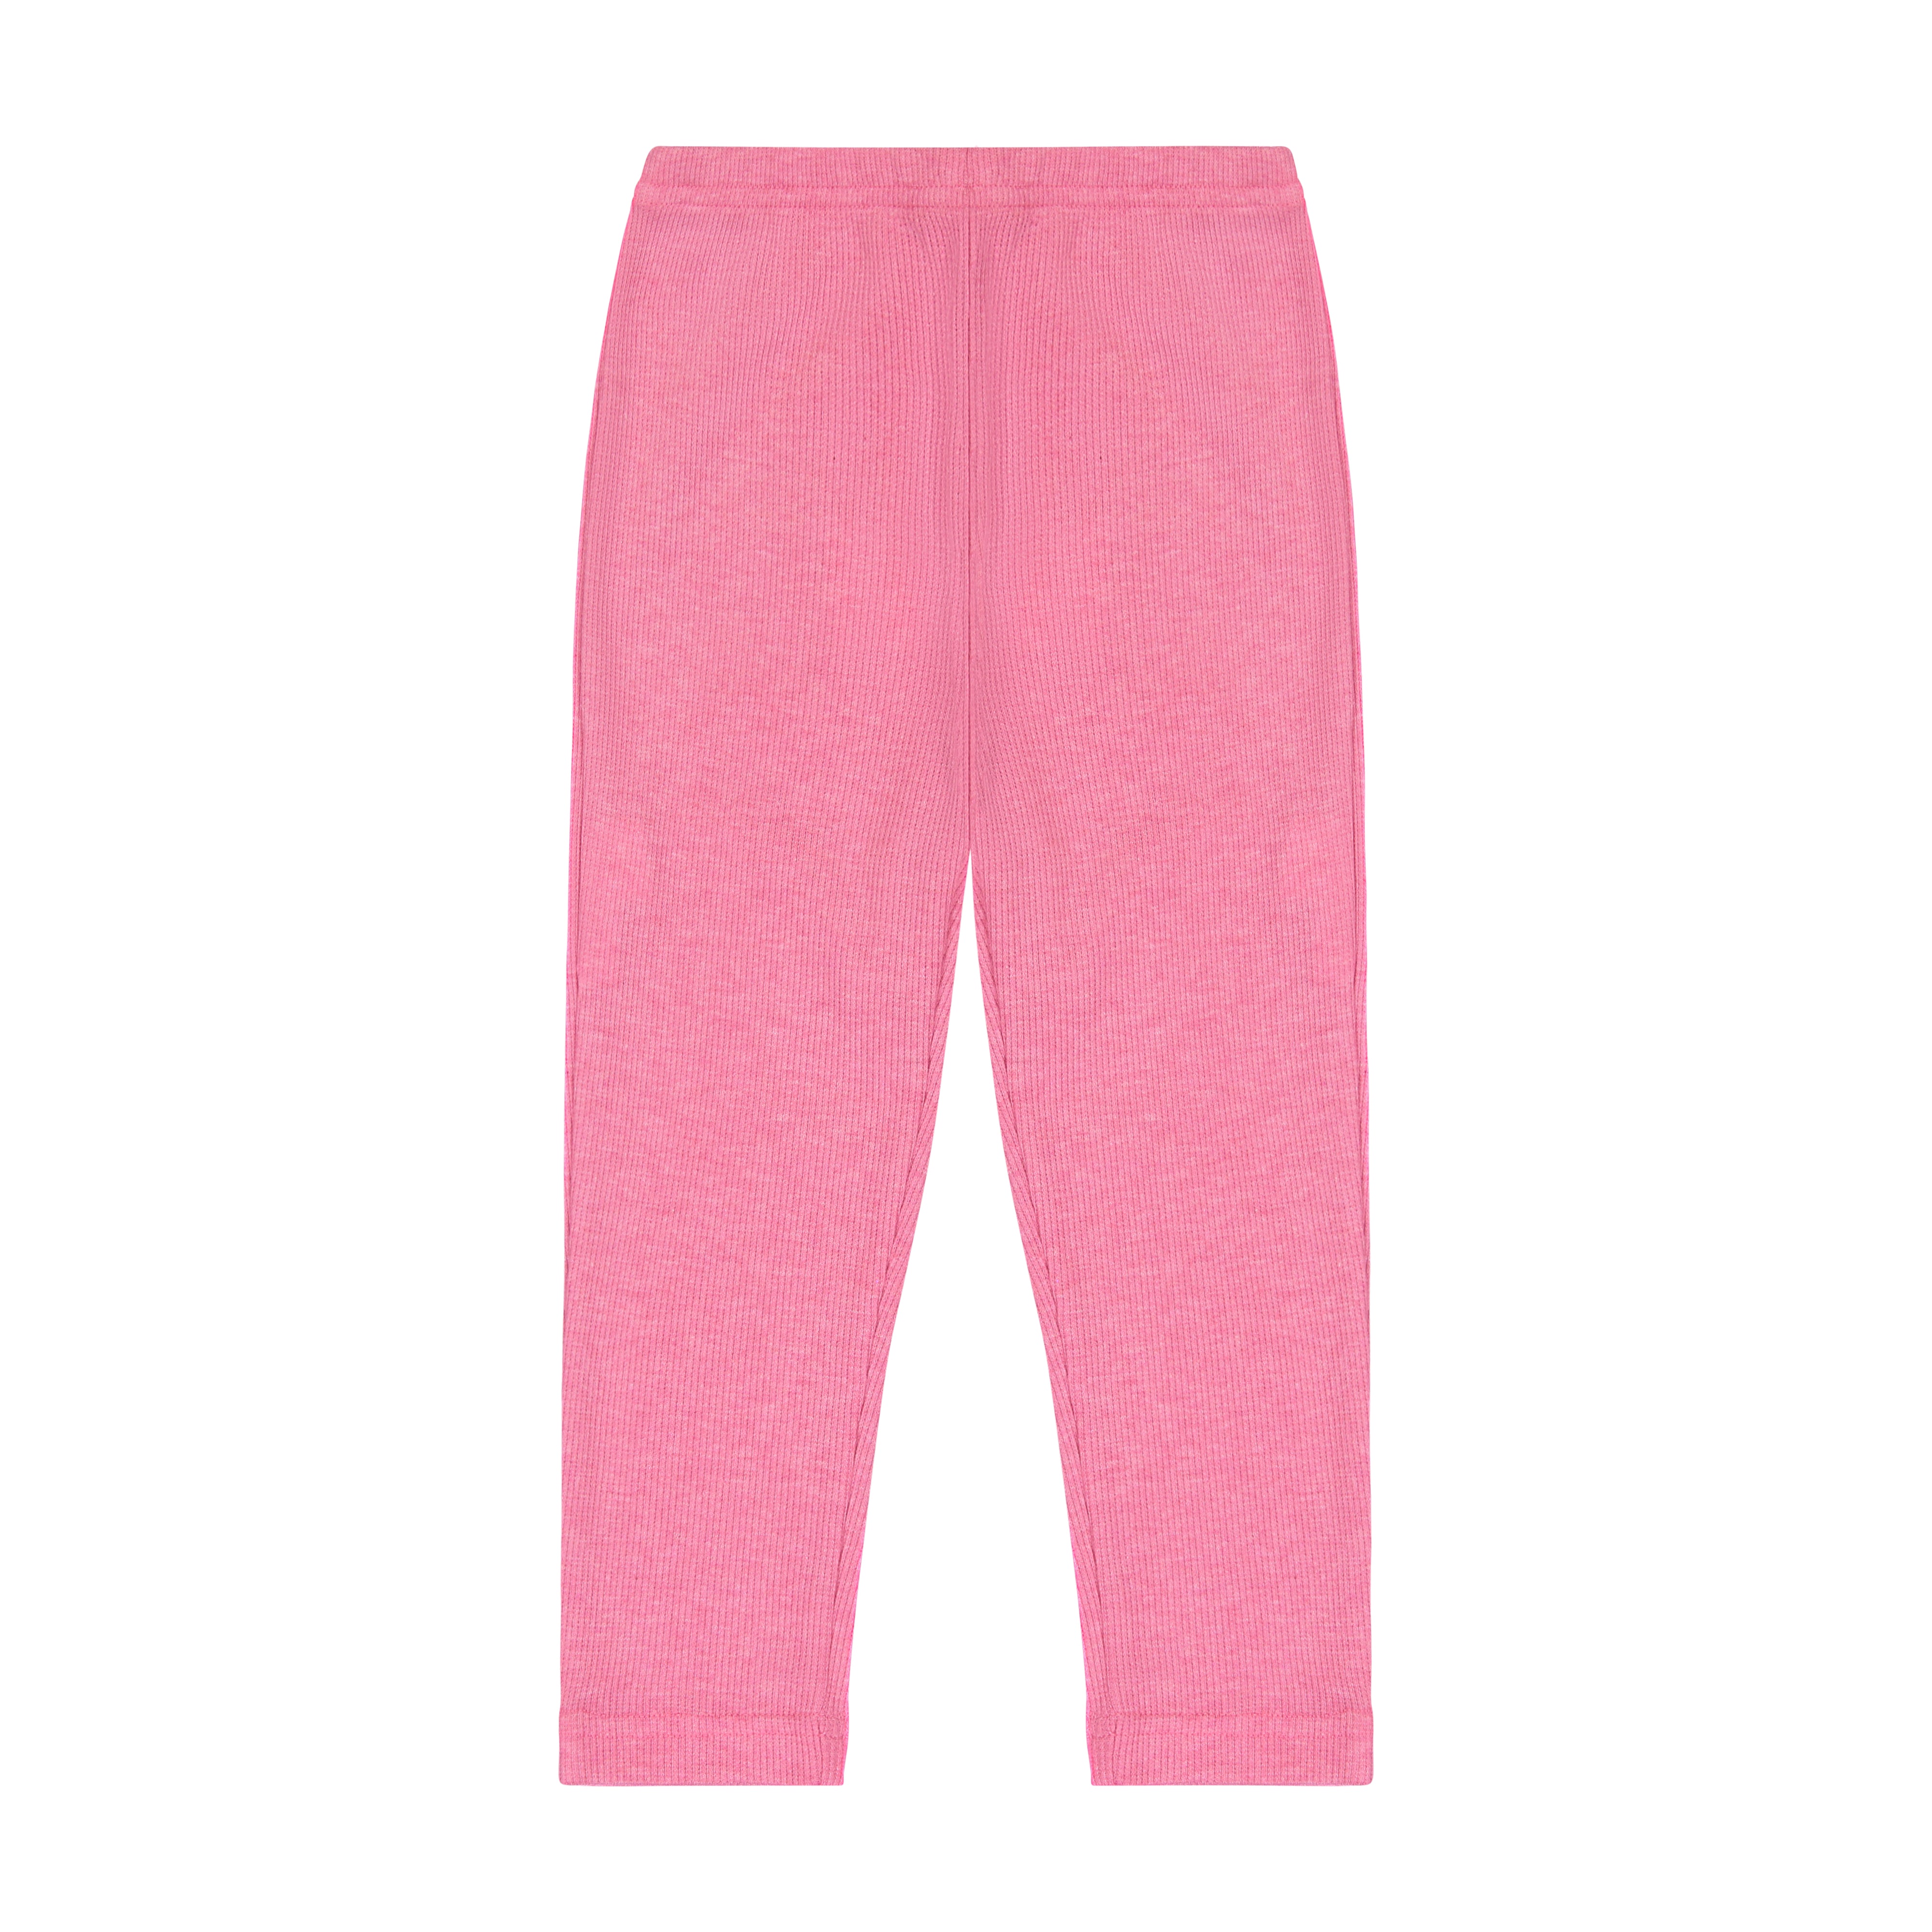 Leggings Pink Ribbed Knit – Busy Bees